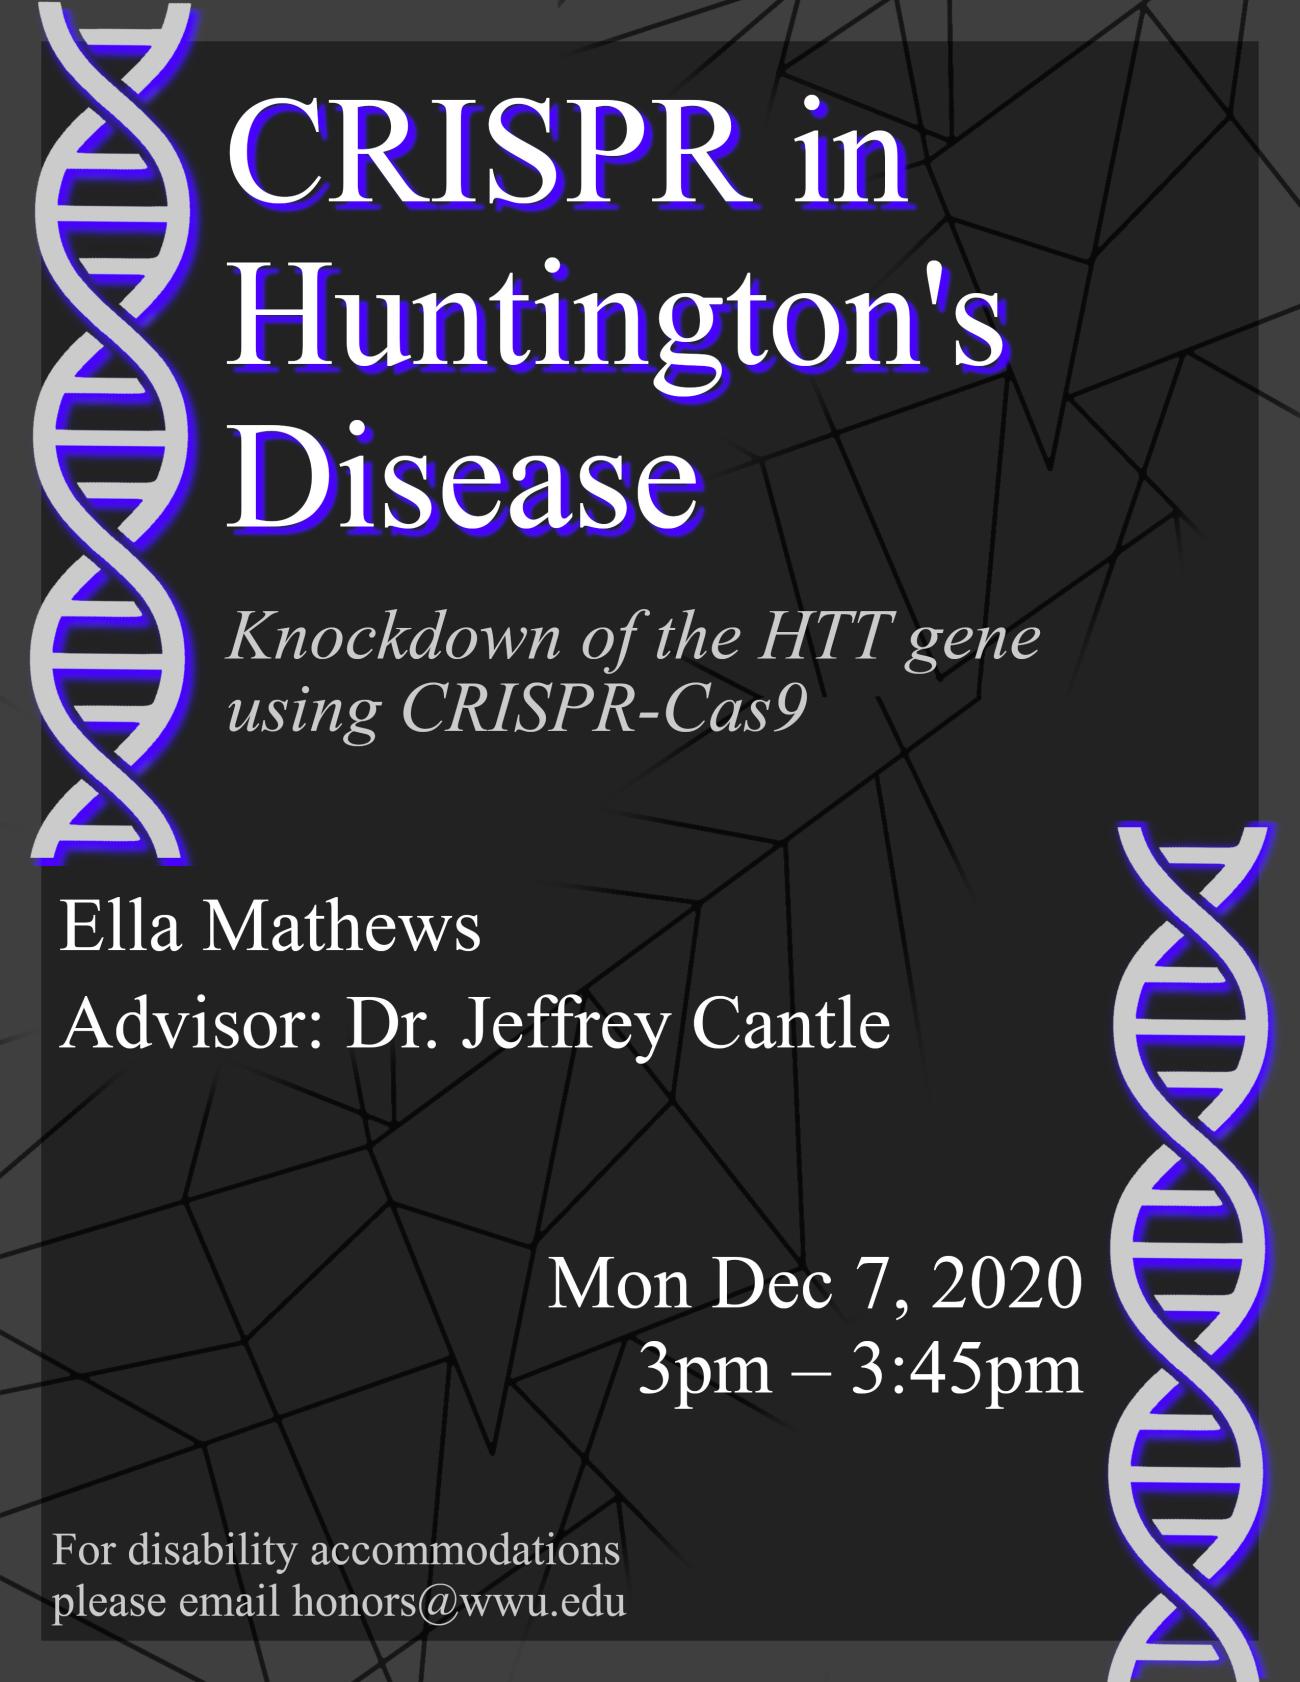 Image: Two cartoonish strands of purple DNA frame text on a black background. Text: CRISPR in Huntington's disease: Knockdown of the HTT gene using CRISPR-Cas9. By Ella Mathews, Advisor: Dr. Jeffrey Cantle. Mon Dec 7, 2020, 3pm - 3:45pm. For disability accommodations please email honors@wwu.edu"